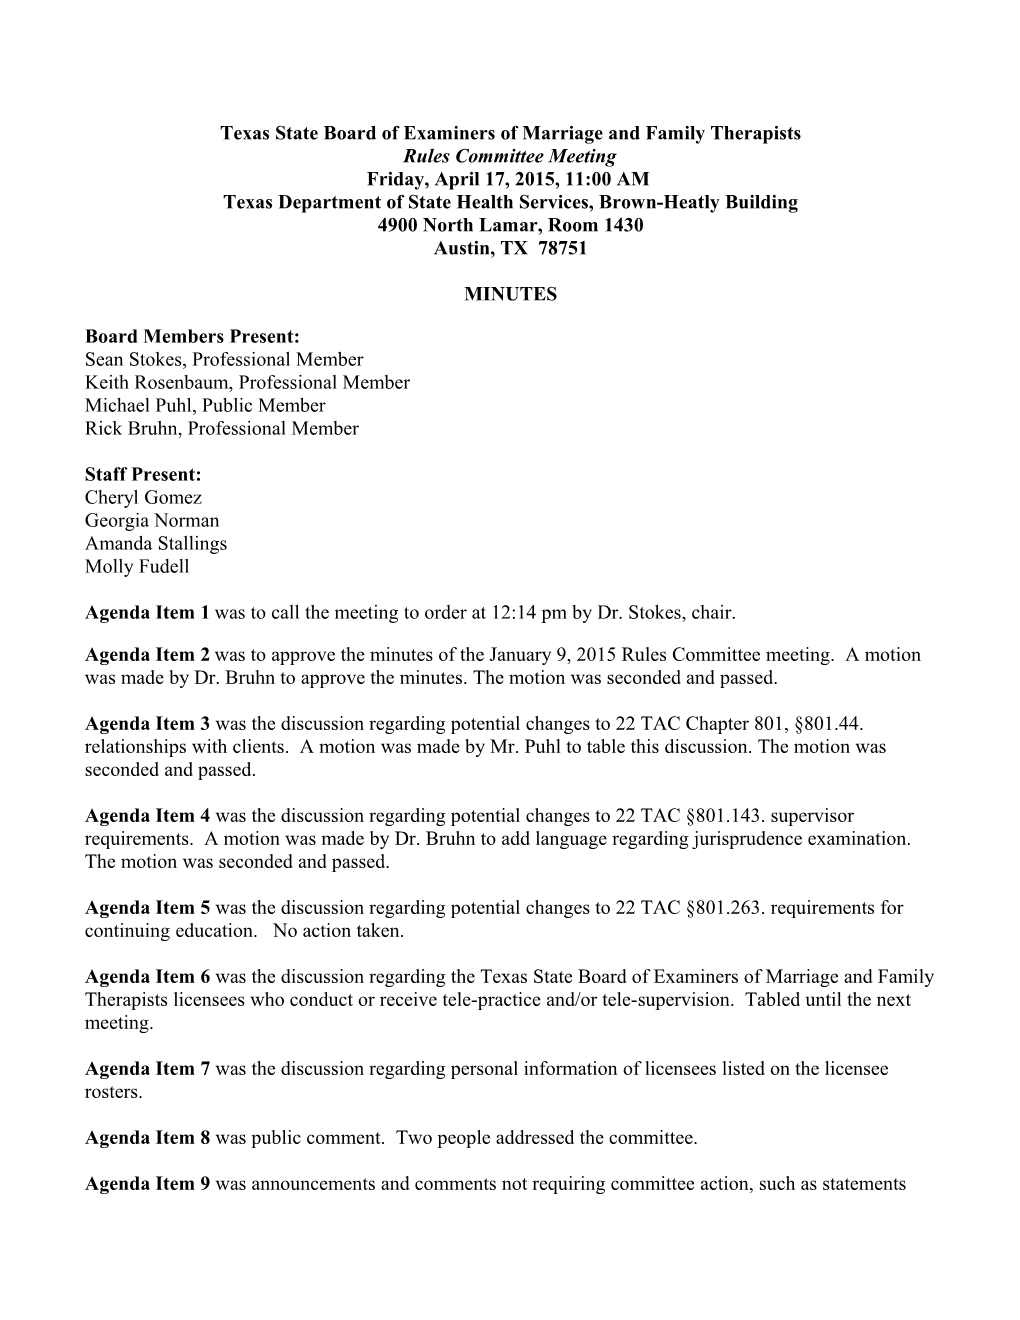 Texas State Board of Social Worker Examiners Board - Minutes